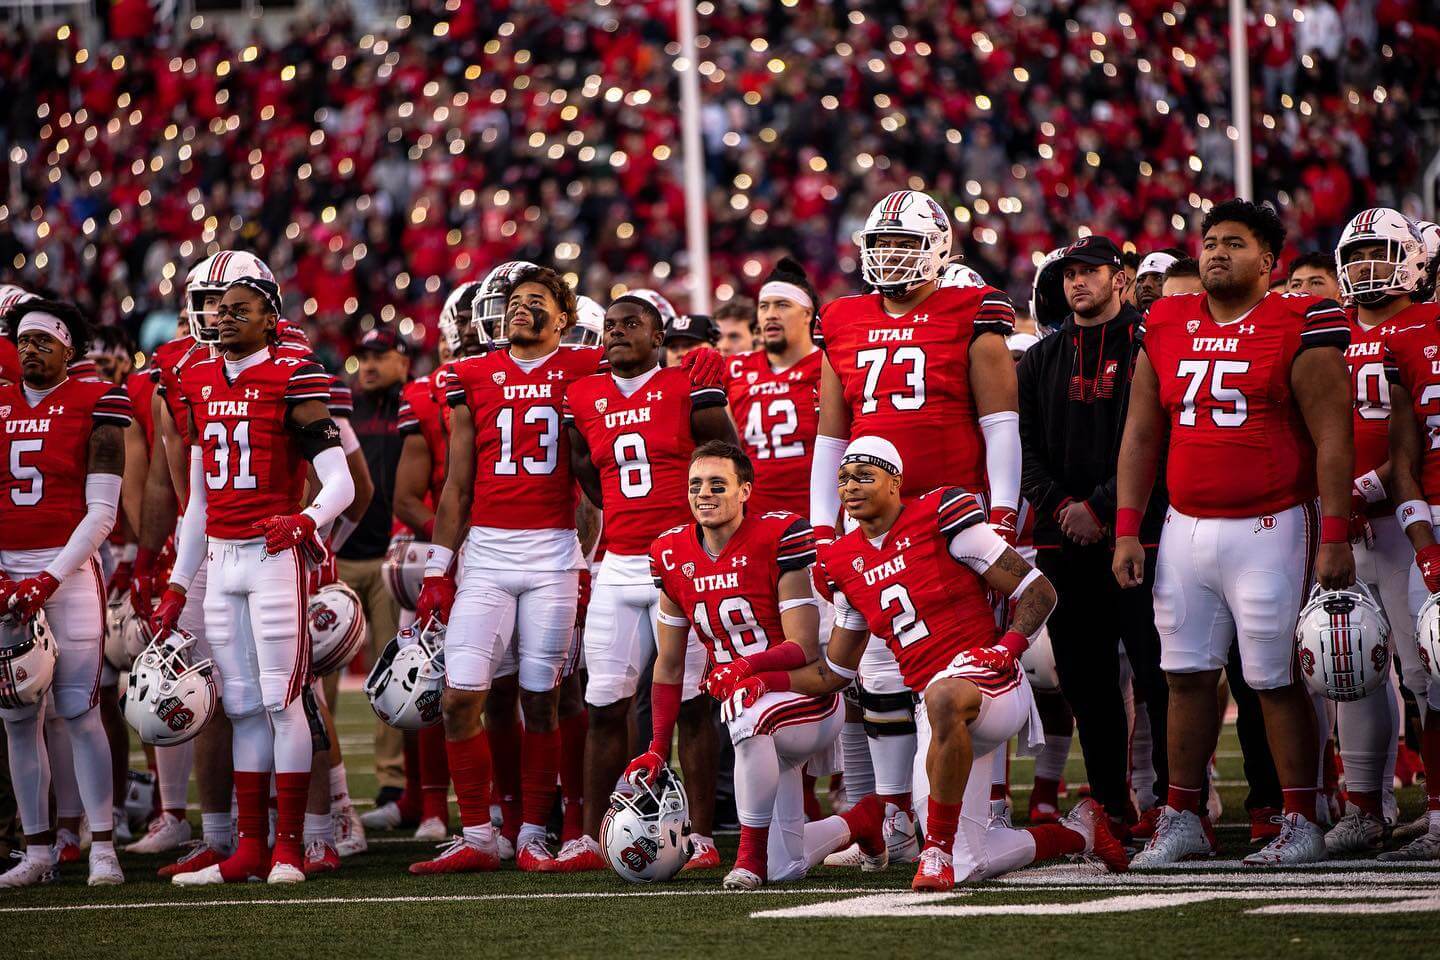 football players stand on sideline